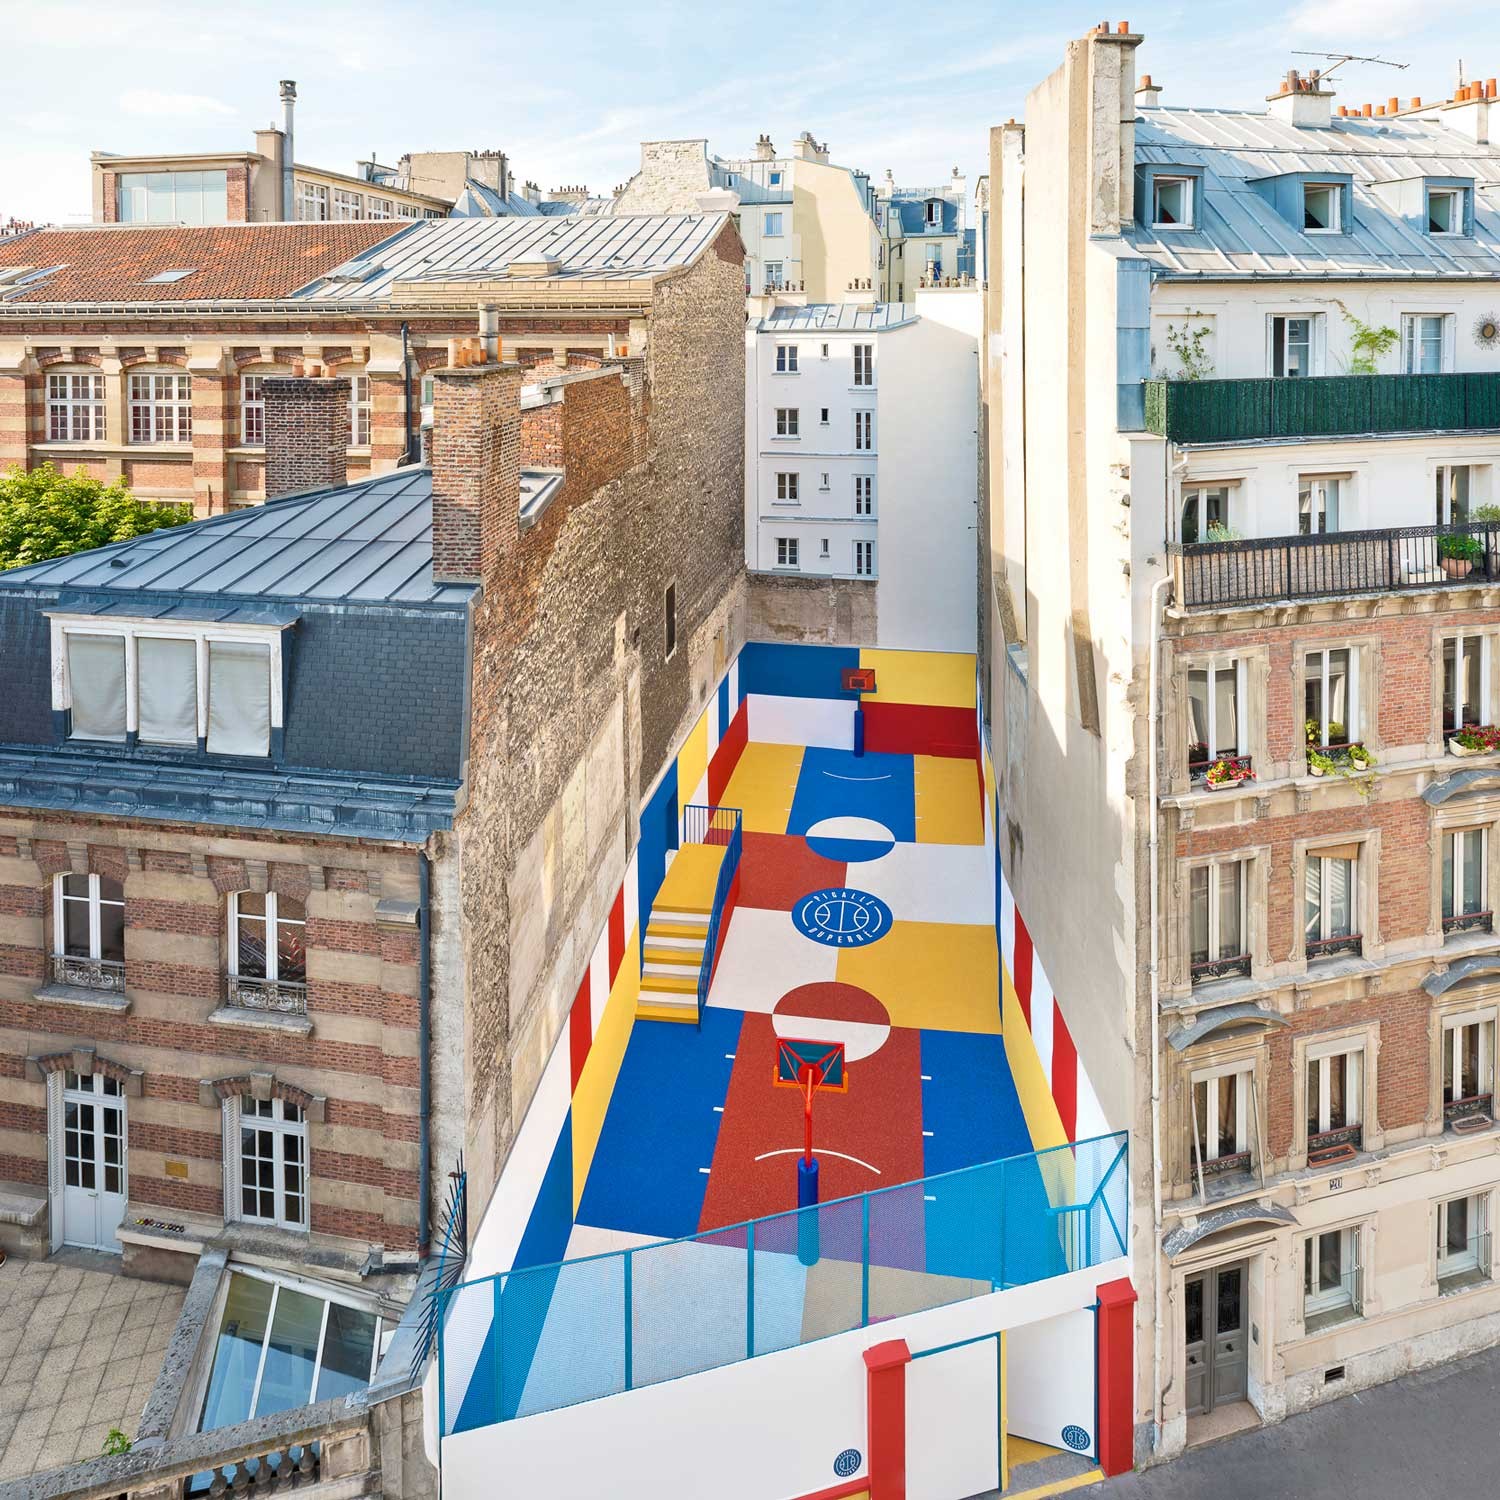 Pigalle-Duperre-and-Ill-Studio-Paris-Basketball-Court-Multi-Coloured-Installation-Yellowtrace-10.jpg